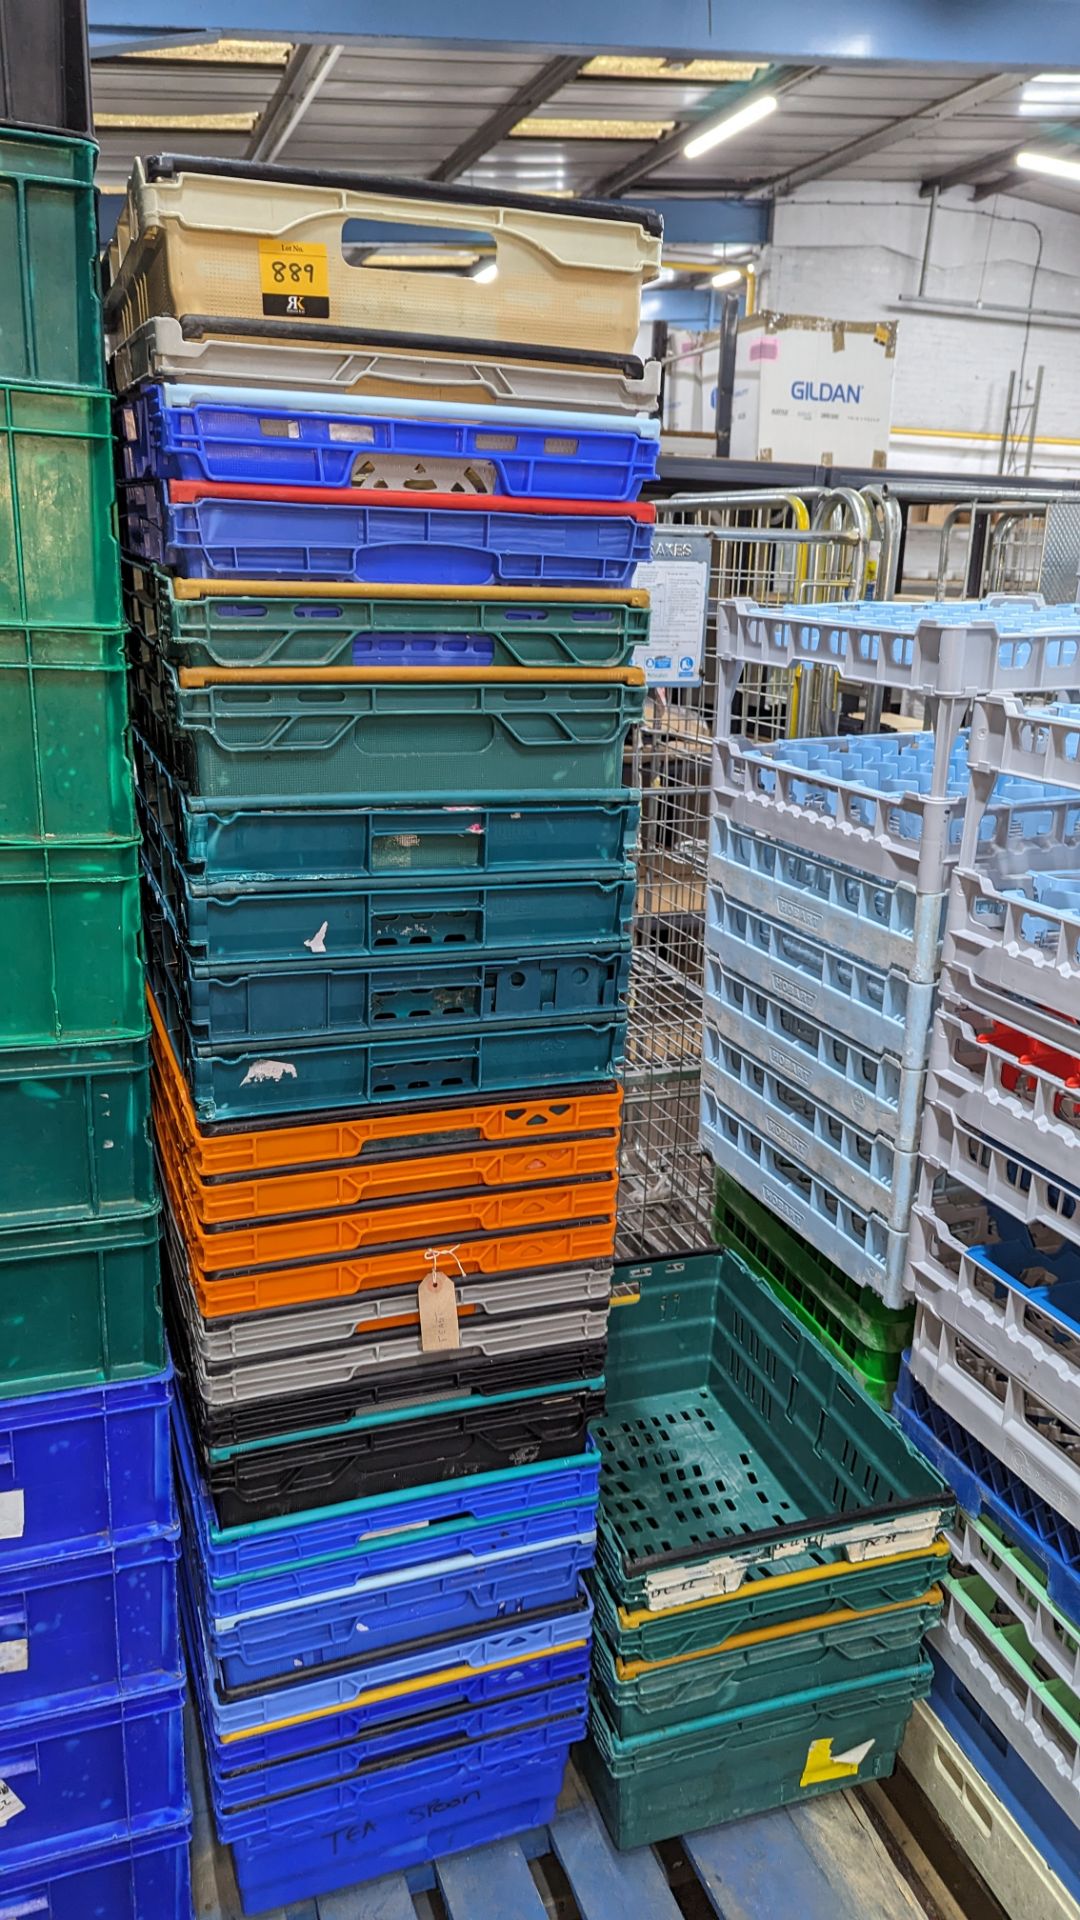 Stack of approximately 30 assorted stacking crates in several different styles - 2 stacks